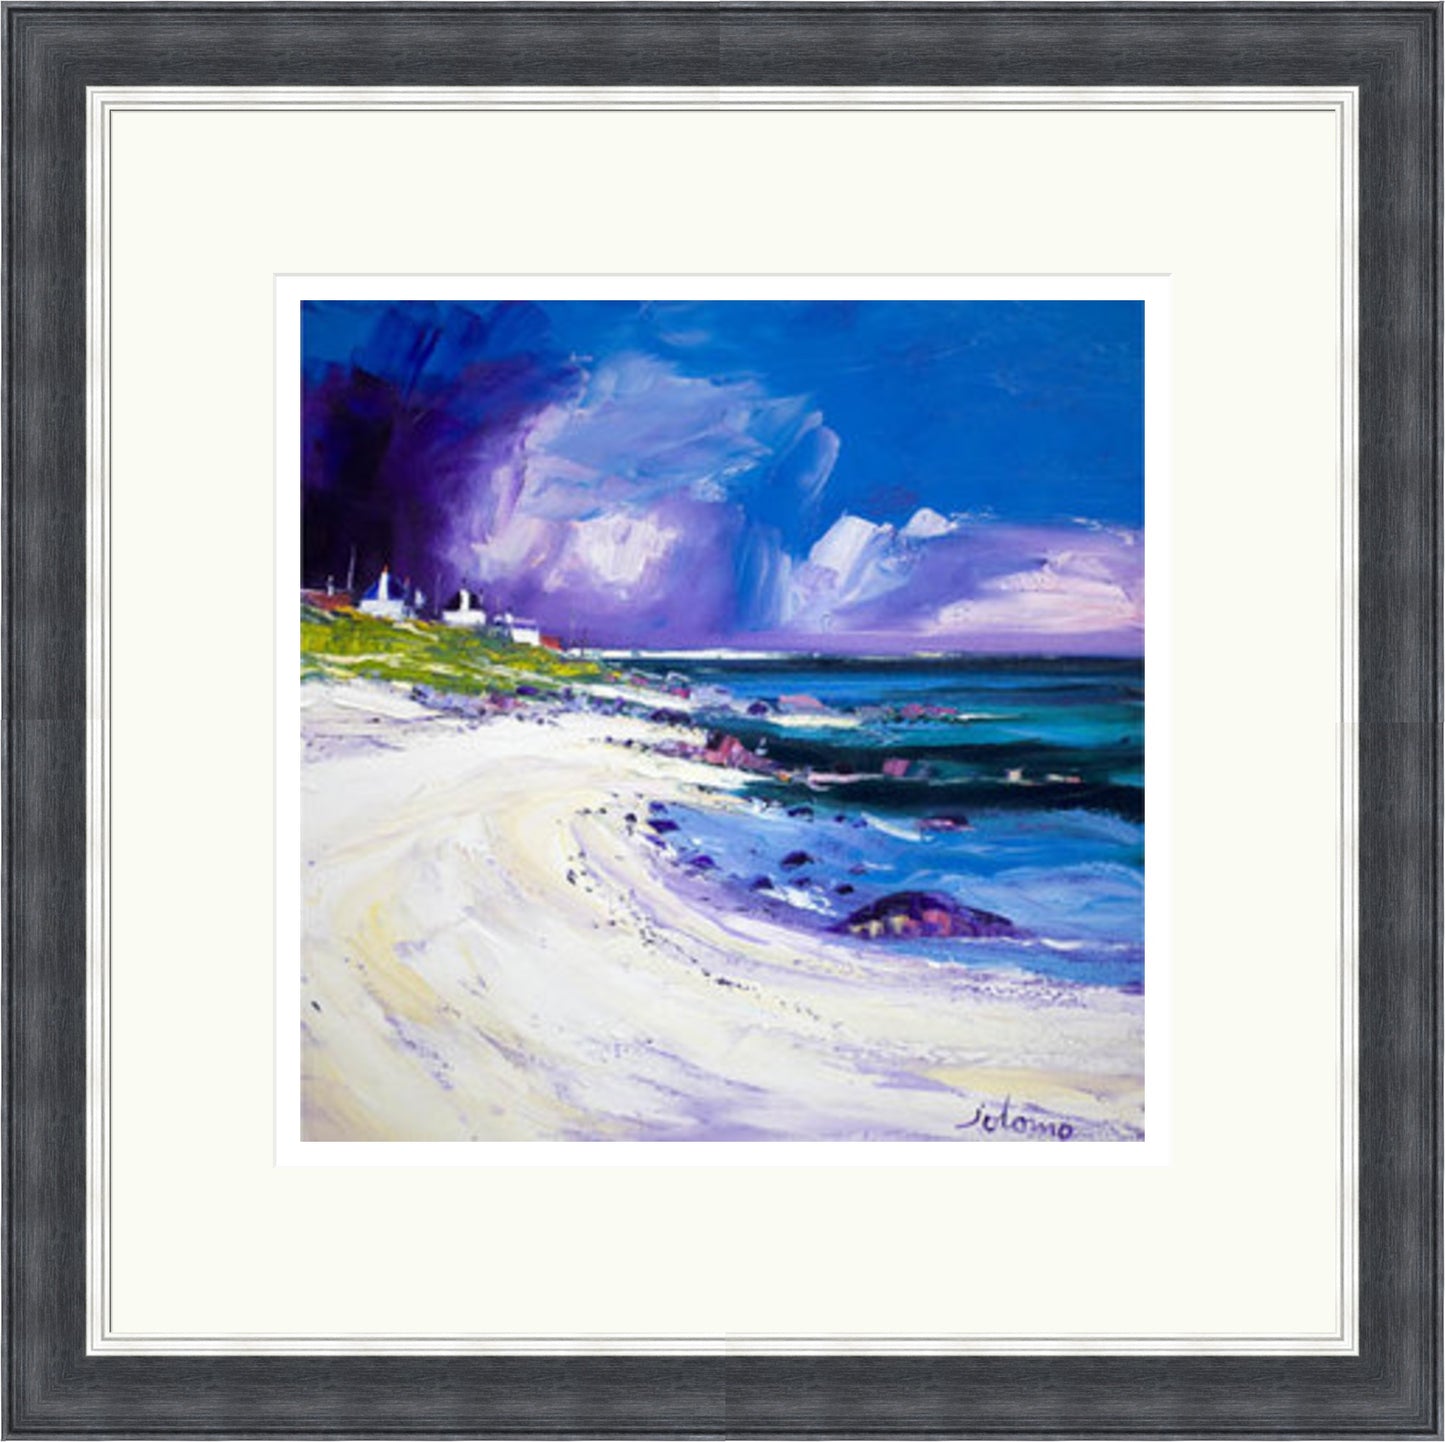 Rain Squall, Balemartine, Isle of Tiree Signed Limited Edition by John Lowrie Morrison (JOLOMO)